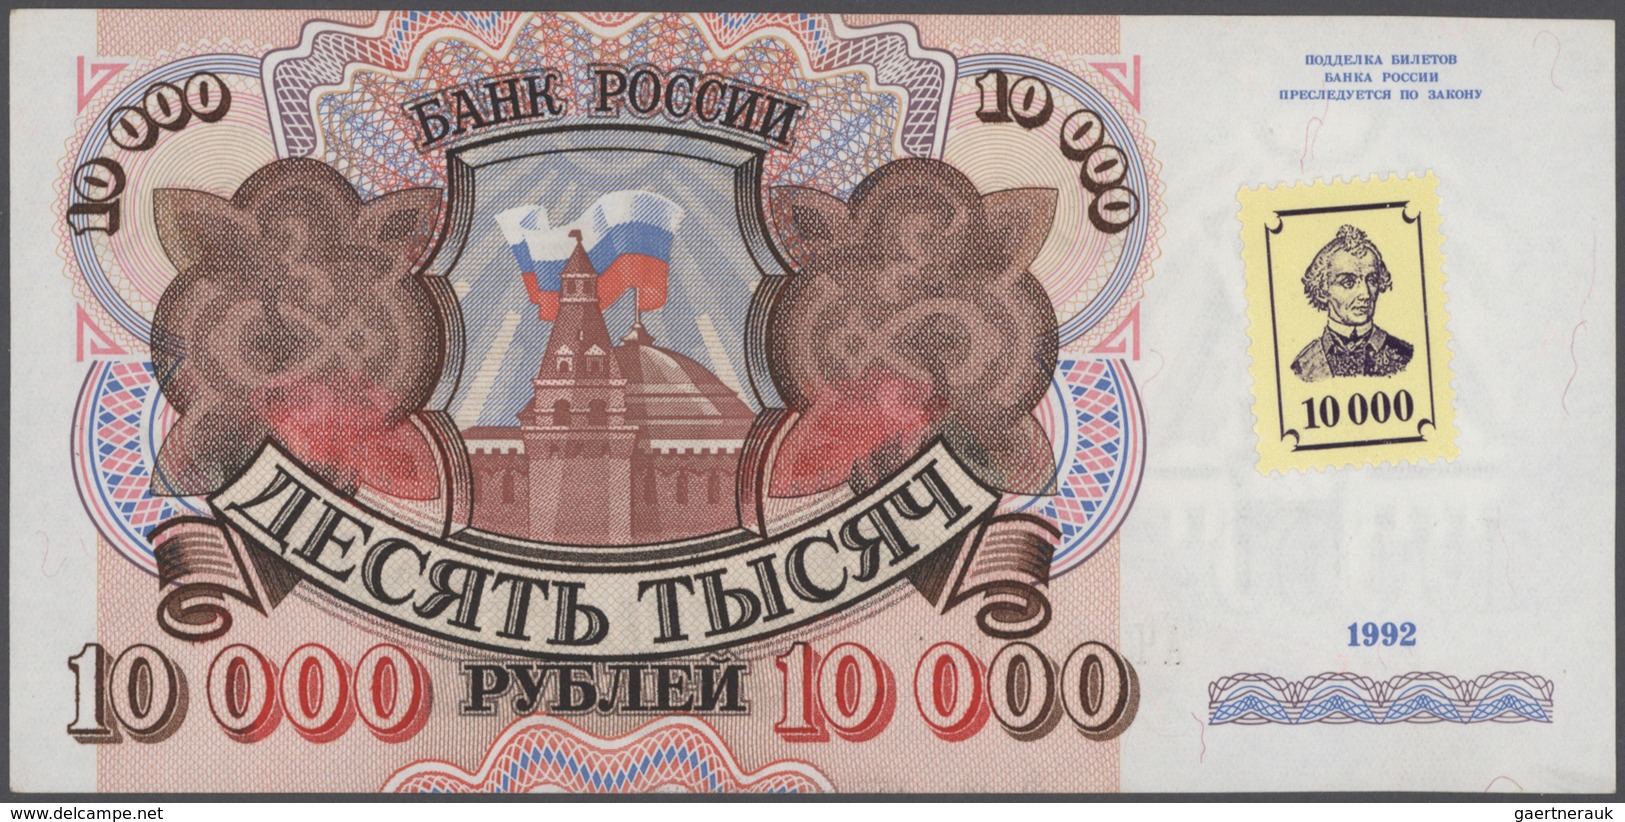 Alle Welt: Collectors album with about 400 banknotes Russia, Romania, Serbia, Slovakia, Ukraine, Yug